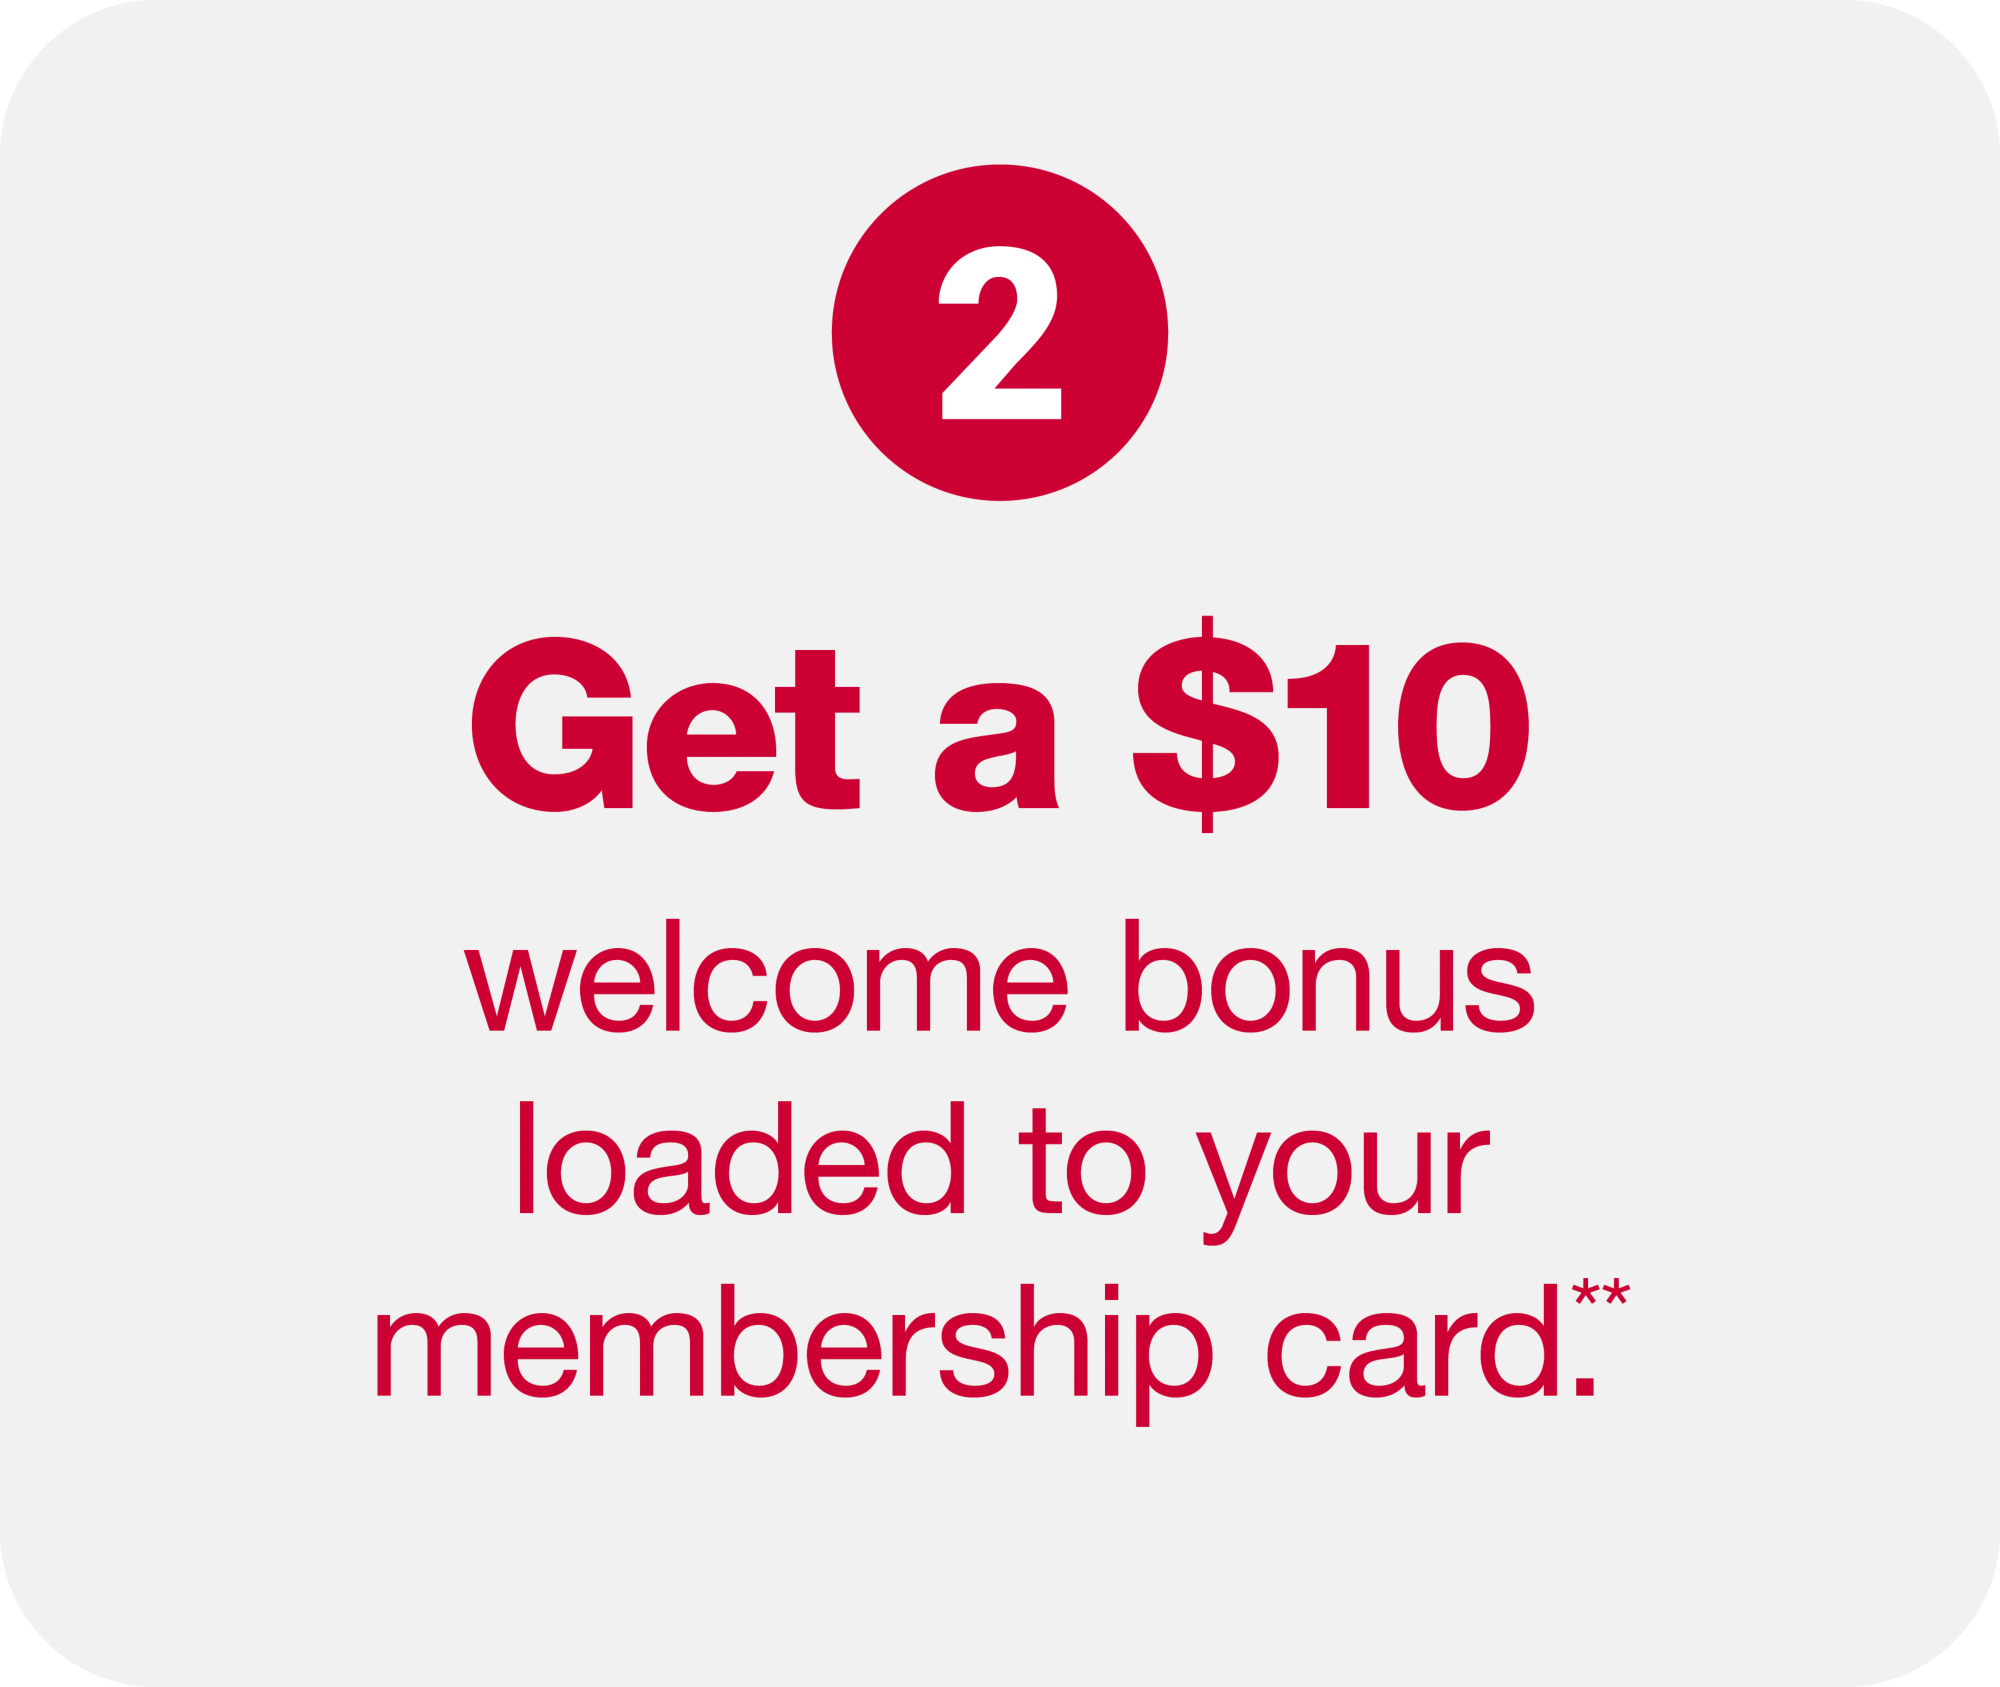 2.) Get a $10 welcome bonus loaded to your membershp card.**